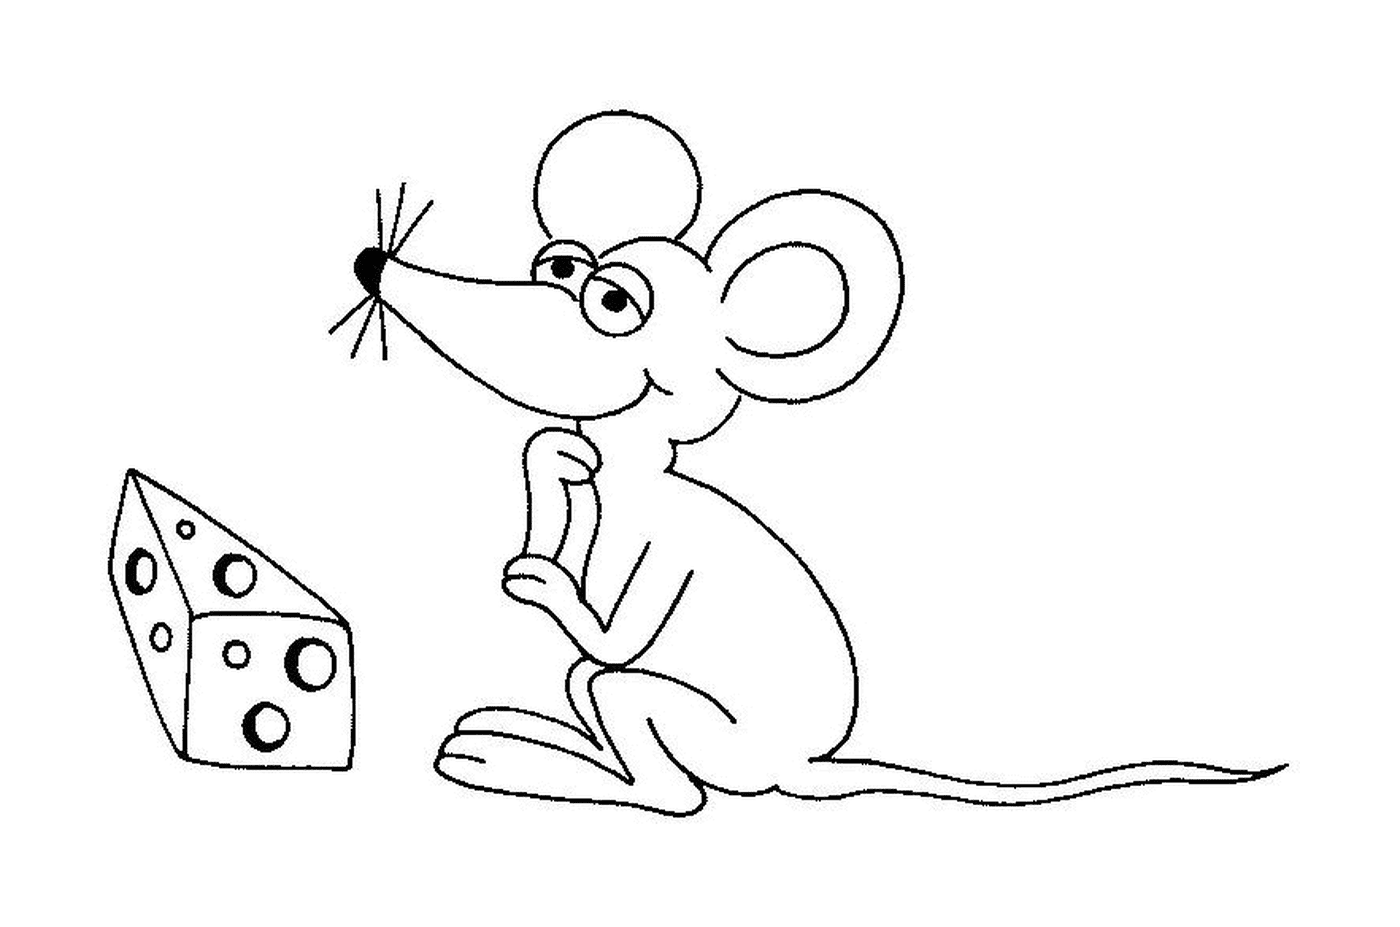  A mouse in front of cheese 